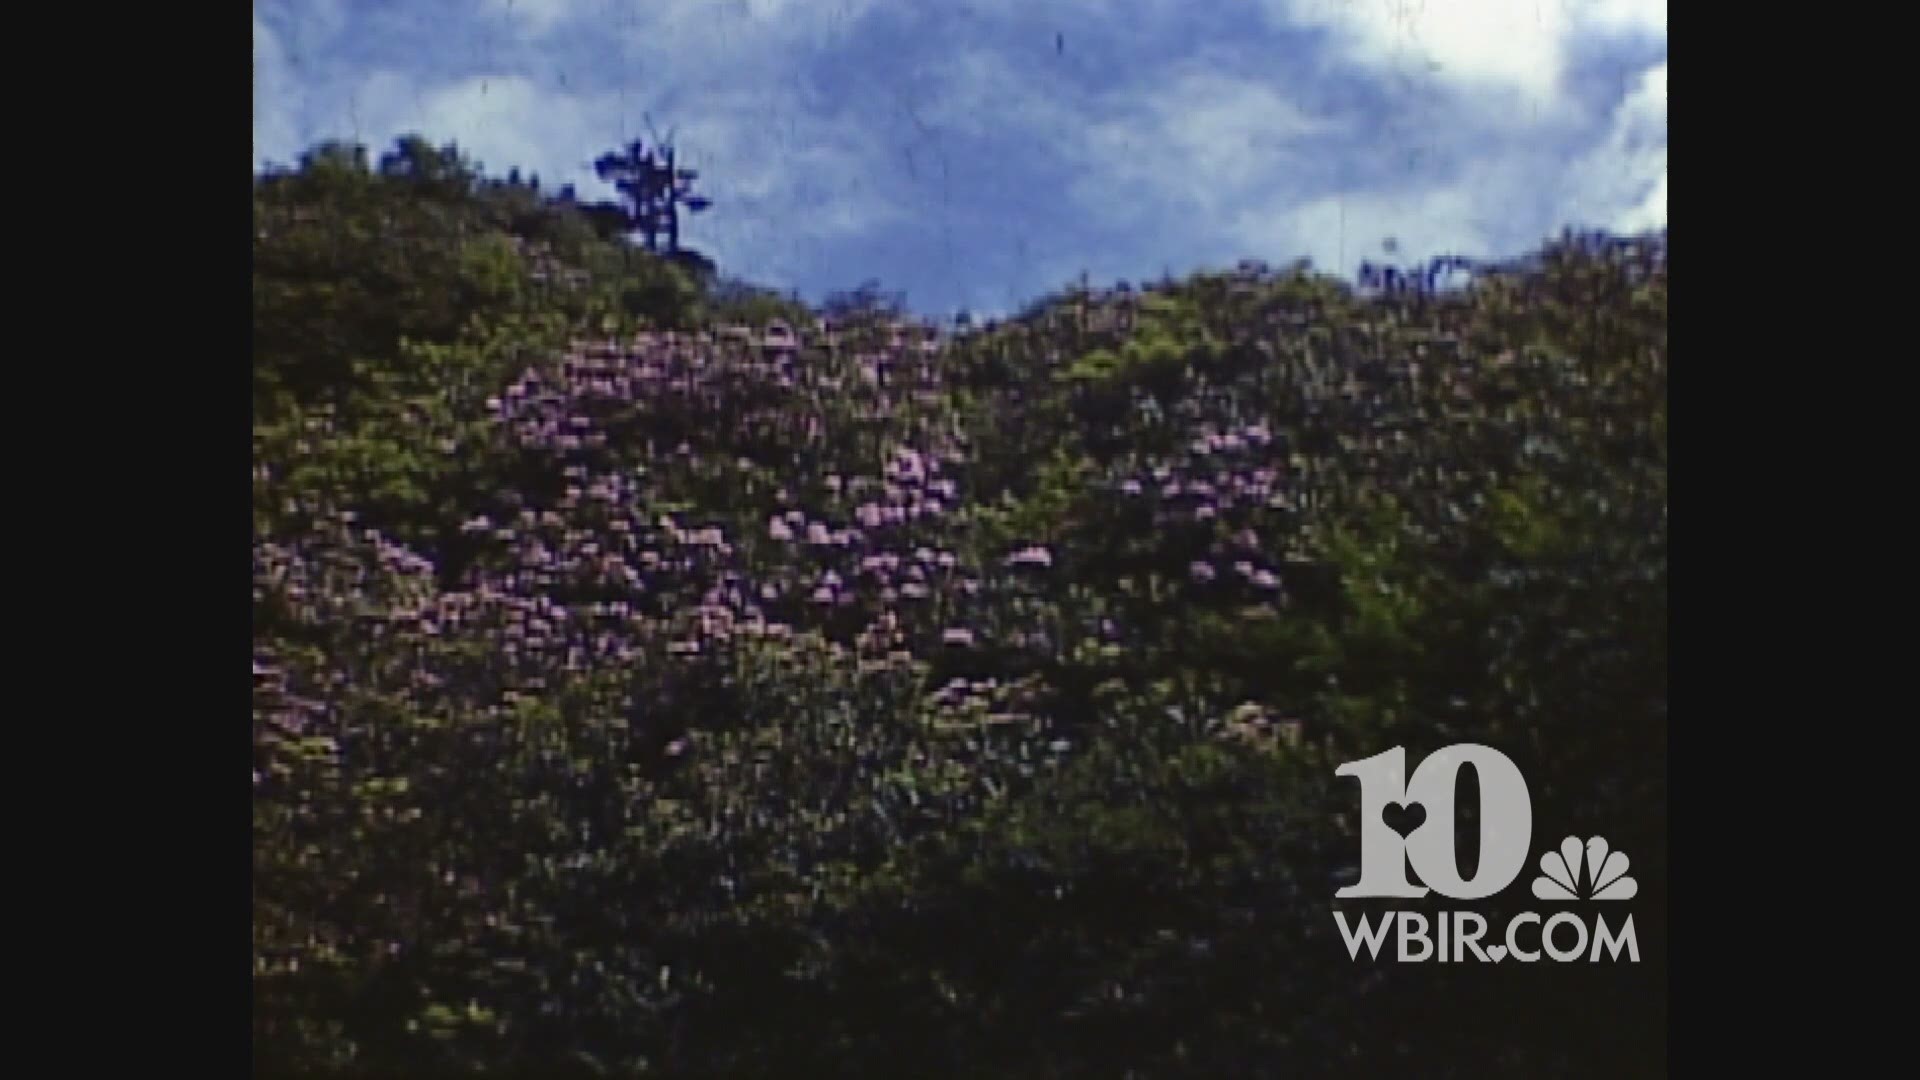 In this Hunt for History extra, see the full lost-and-found silent footage of the Great Smoky Mountains shot by Granville Hunt in 1939.